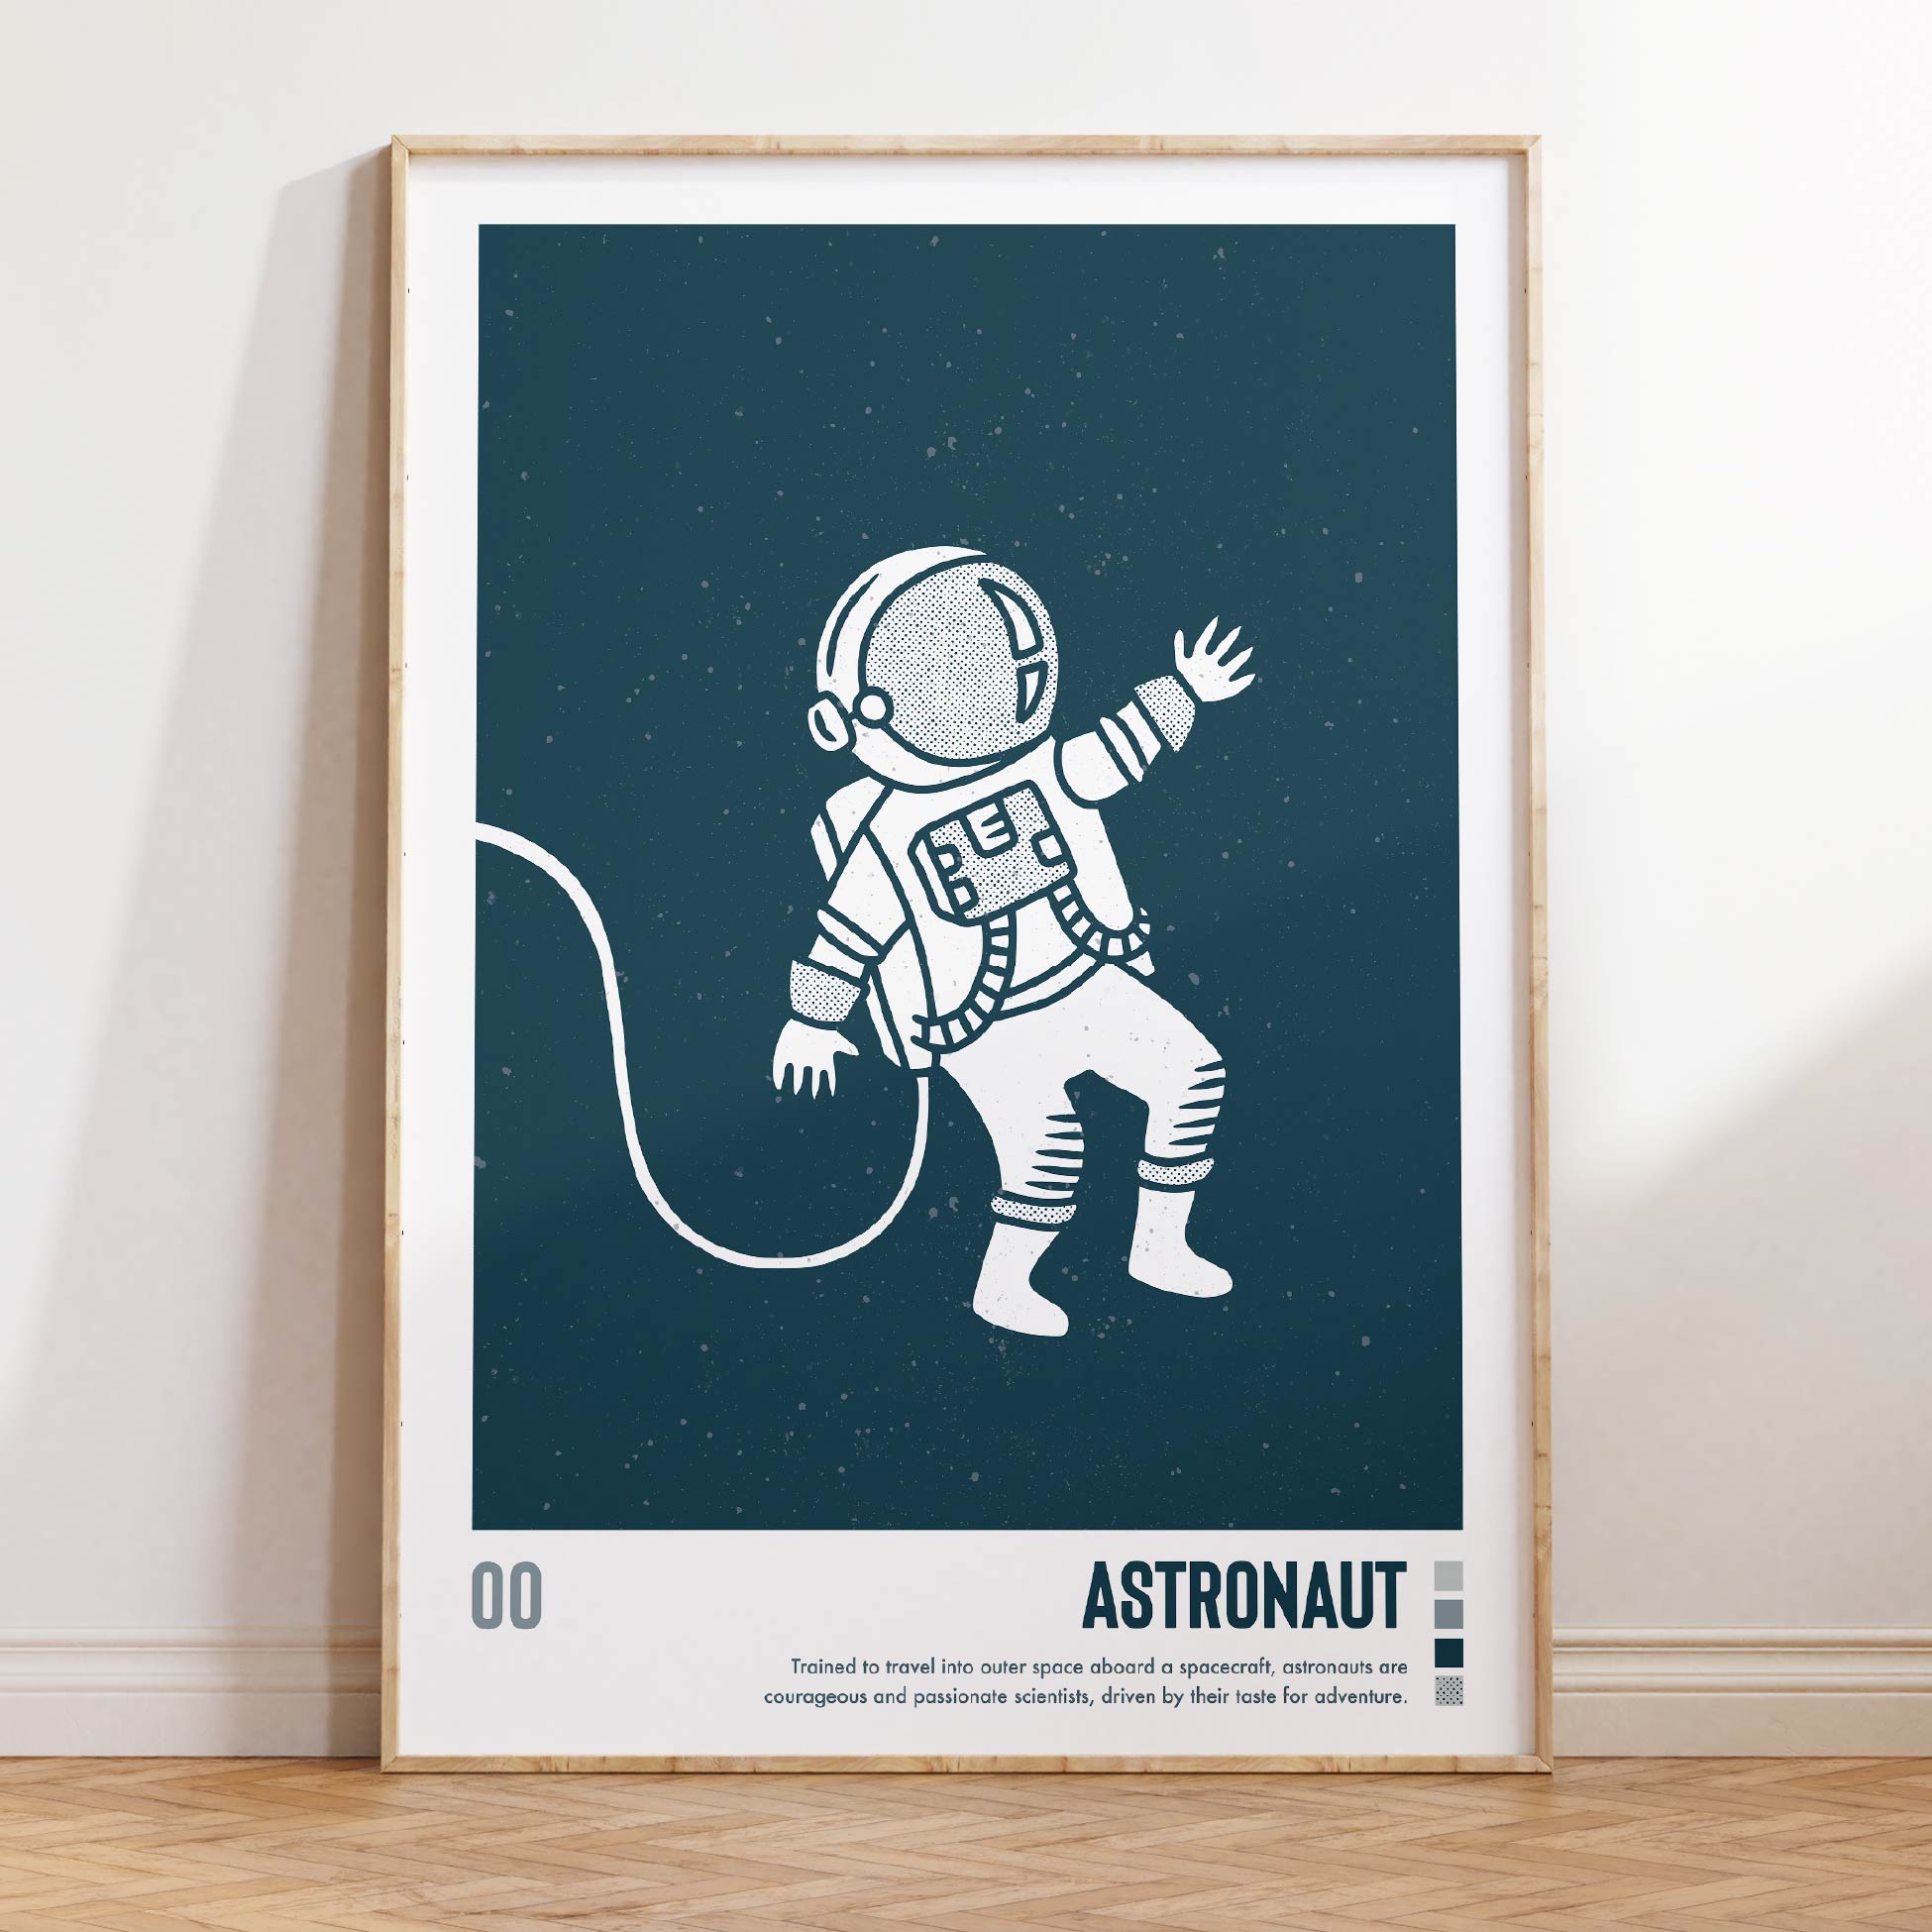 Affiches astronaute - Camille Chauvelin - Graphiste